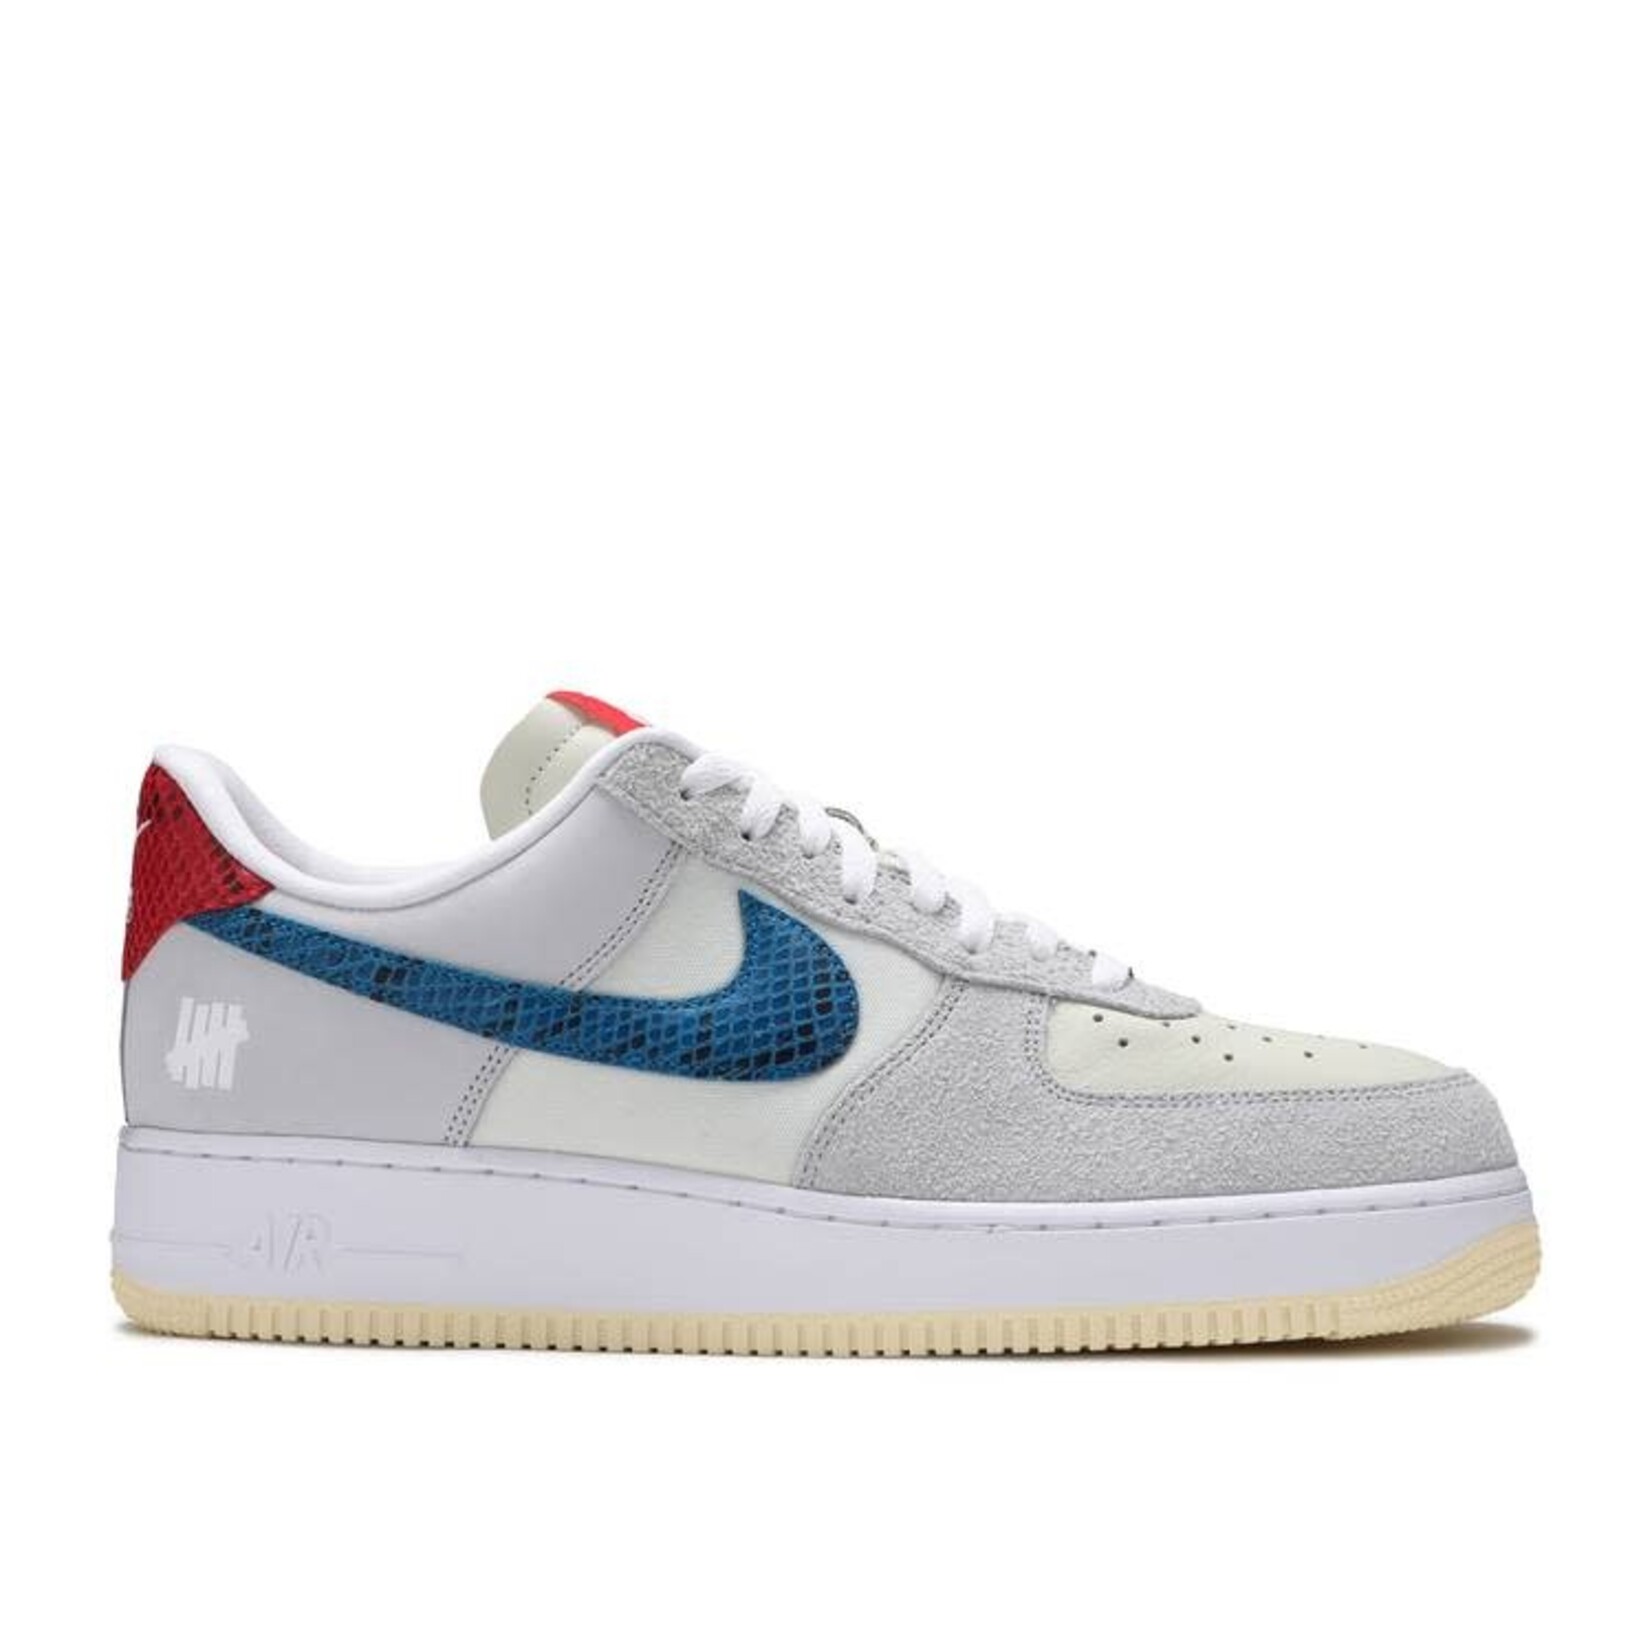 Nike Nike Air Force 1 Low SP Undefeated 5 On It Dunk vs. AF1 Size 6, DS BRAND NEW